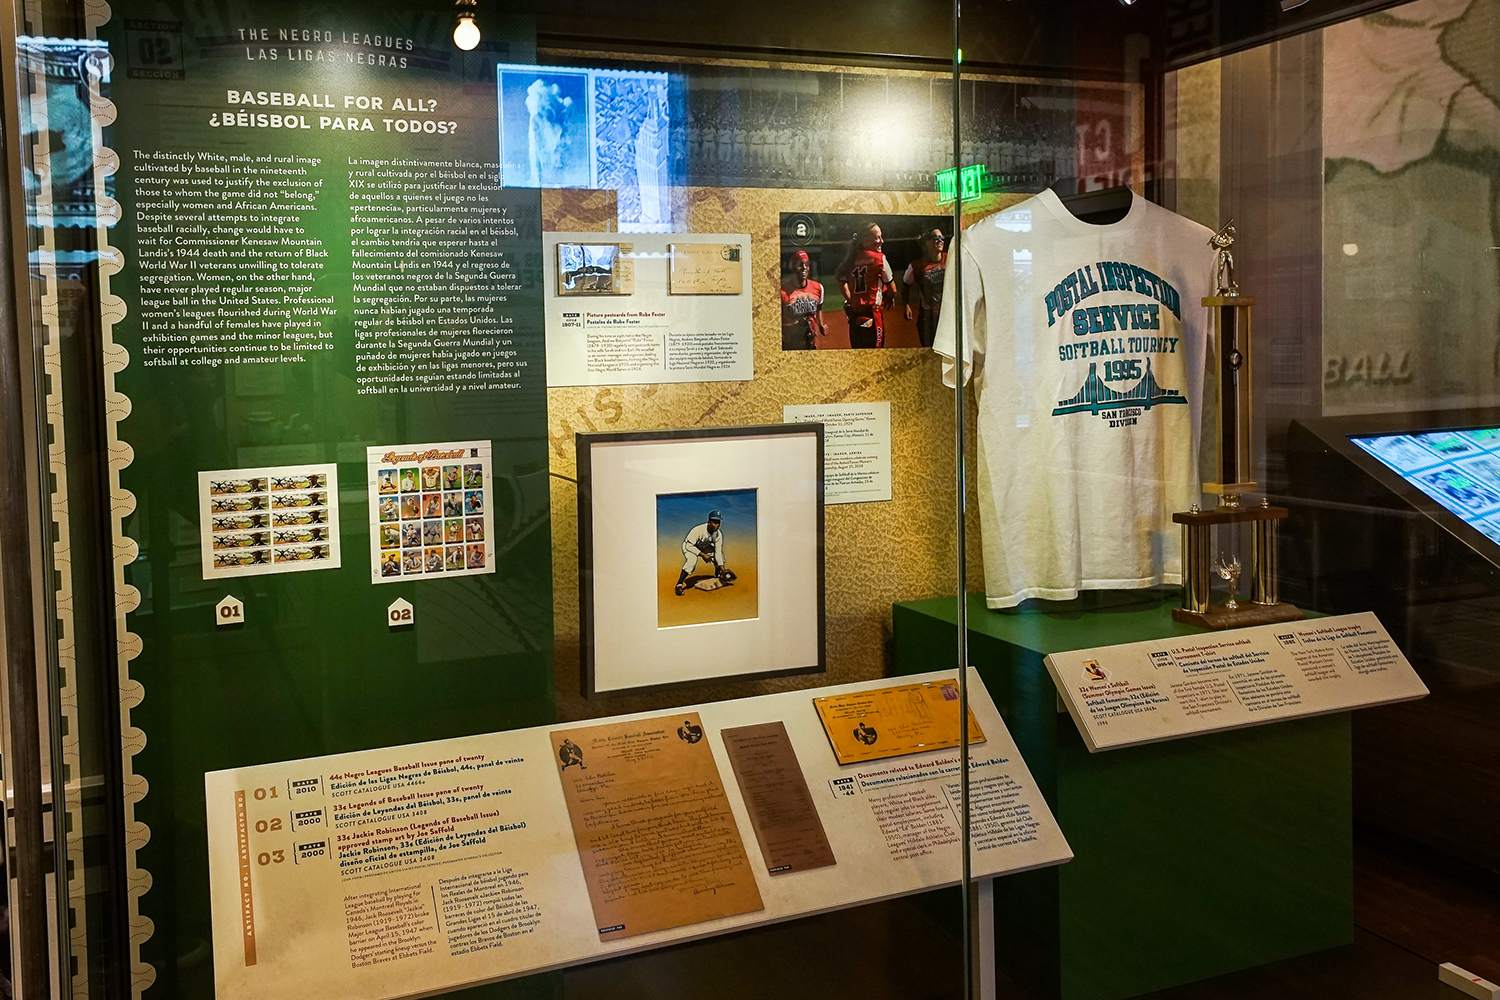 Display case containing memorabilia in the wood-paneled Postmasters Suite gallery